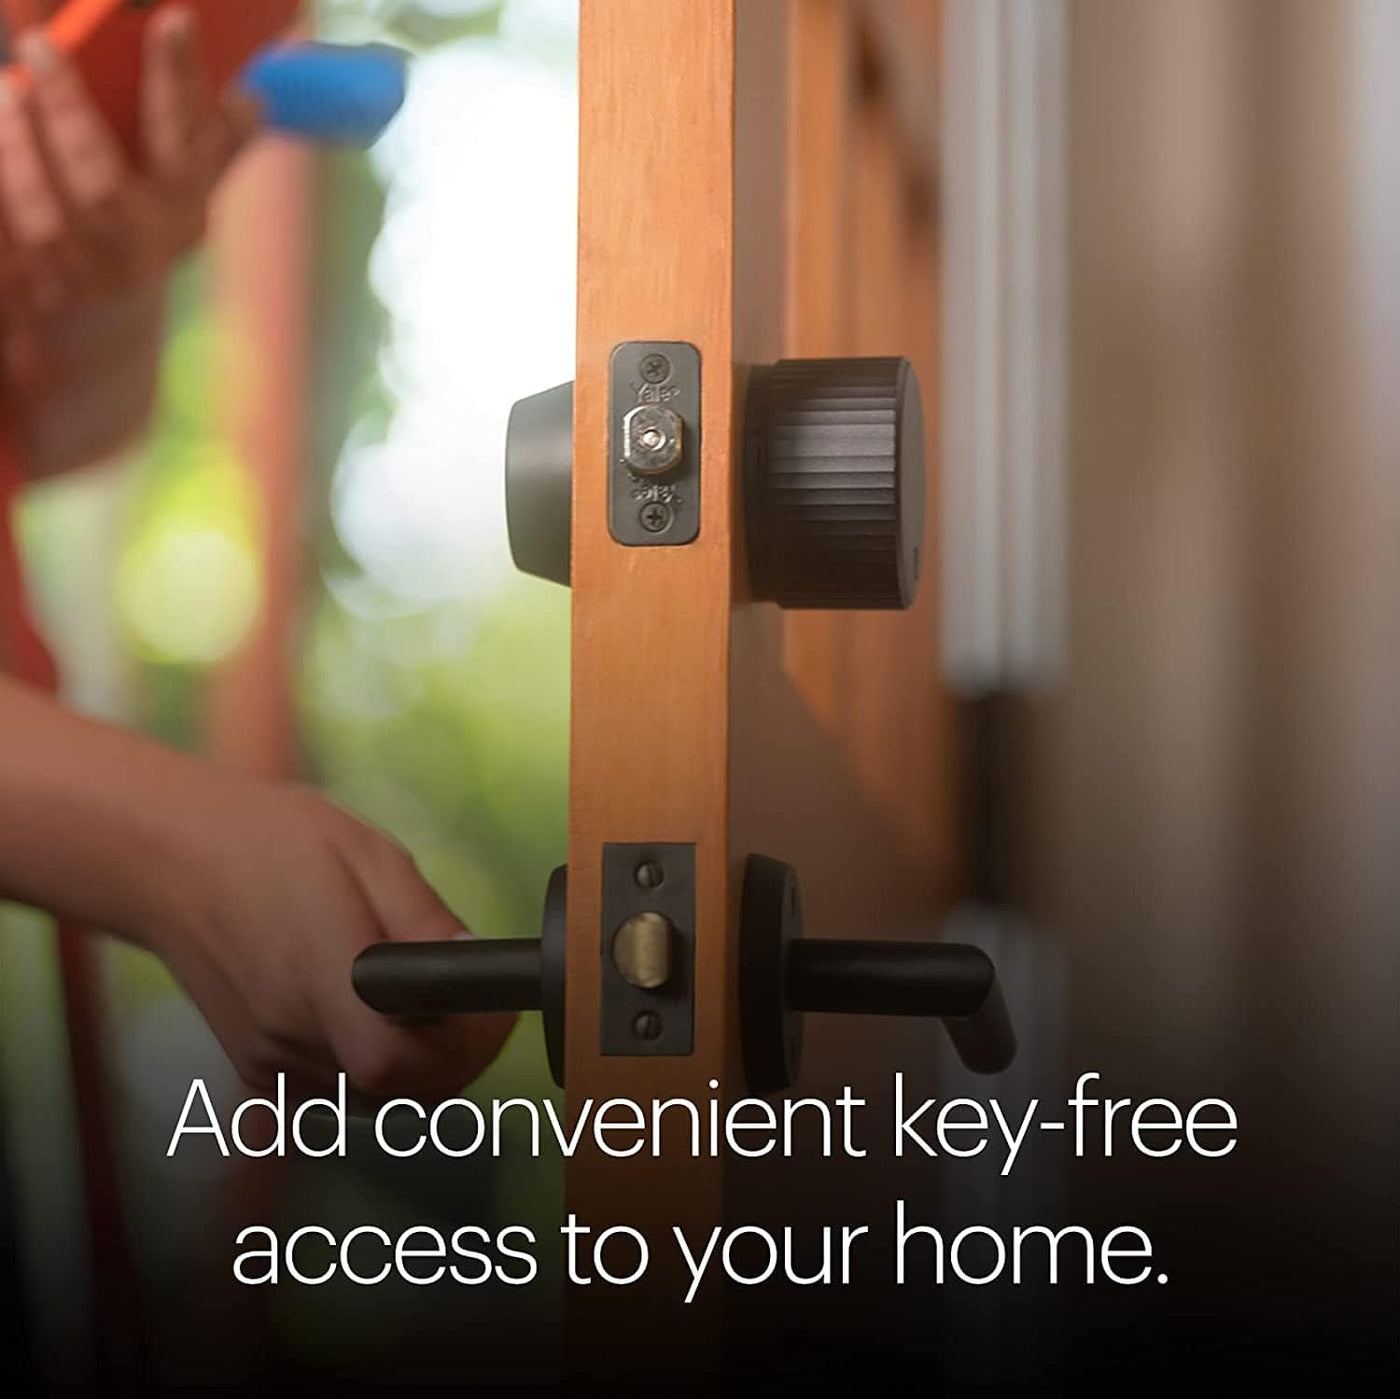 August WiFi Smart Lock Fits Your Existing Deadbolt in Minutes - Smart Tech Shopping